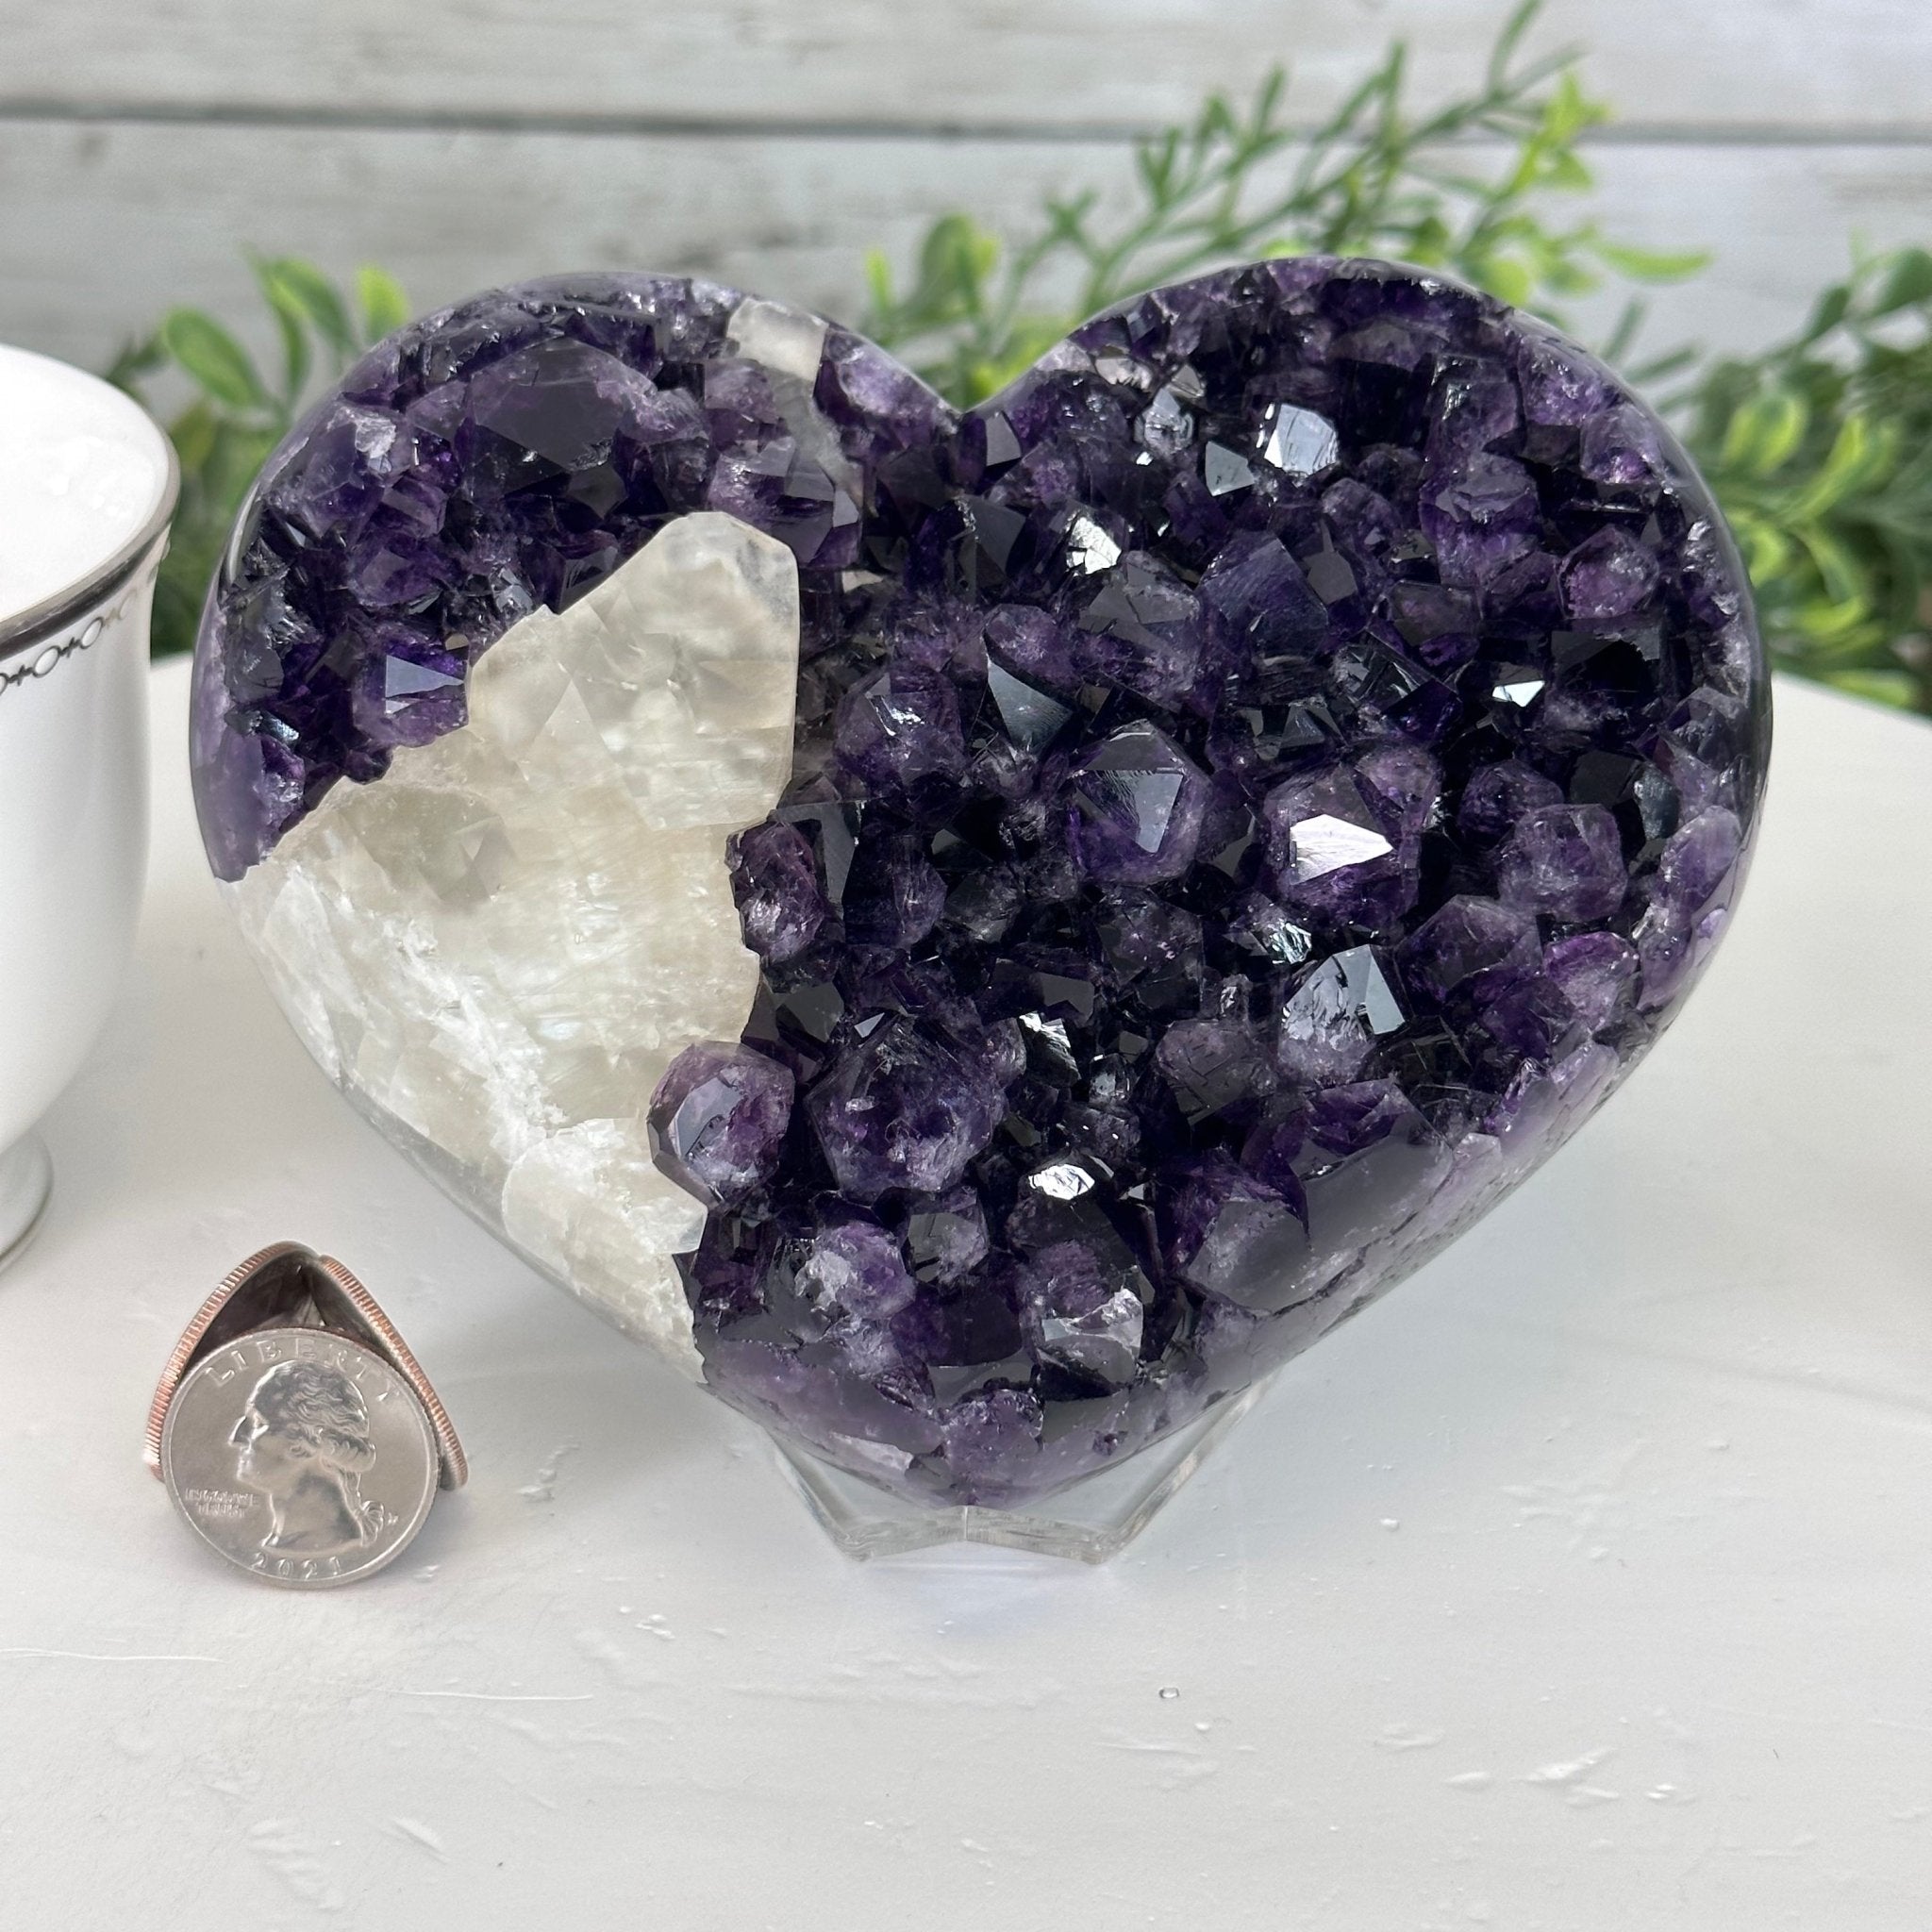 Super Quality Amethyst Heart Geode on an Acrylic Stand 2.7 lbs & 3.75" Tall #5462-0104 by Brazil Gems - Brazil GemsBrazil GemsSuper Quality Amethyst Heart Geode on an Acrylic Stand 2.7 lbs & 3.75" Tall #5462-0104 by Brazil GemsHearts5462-0104